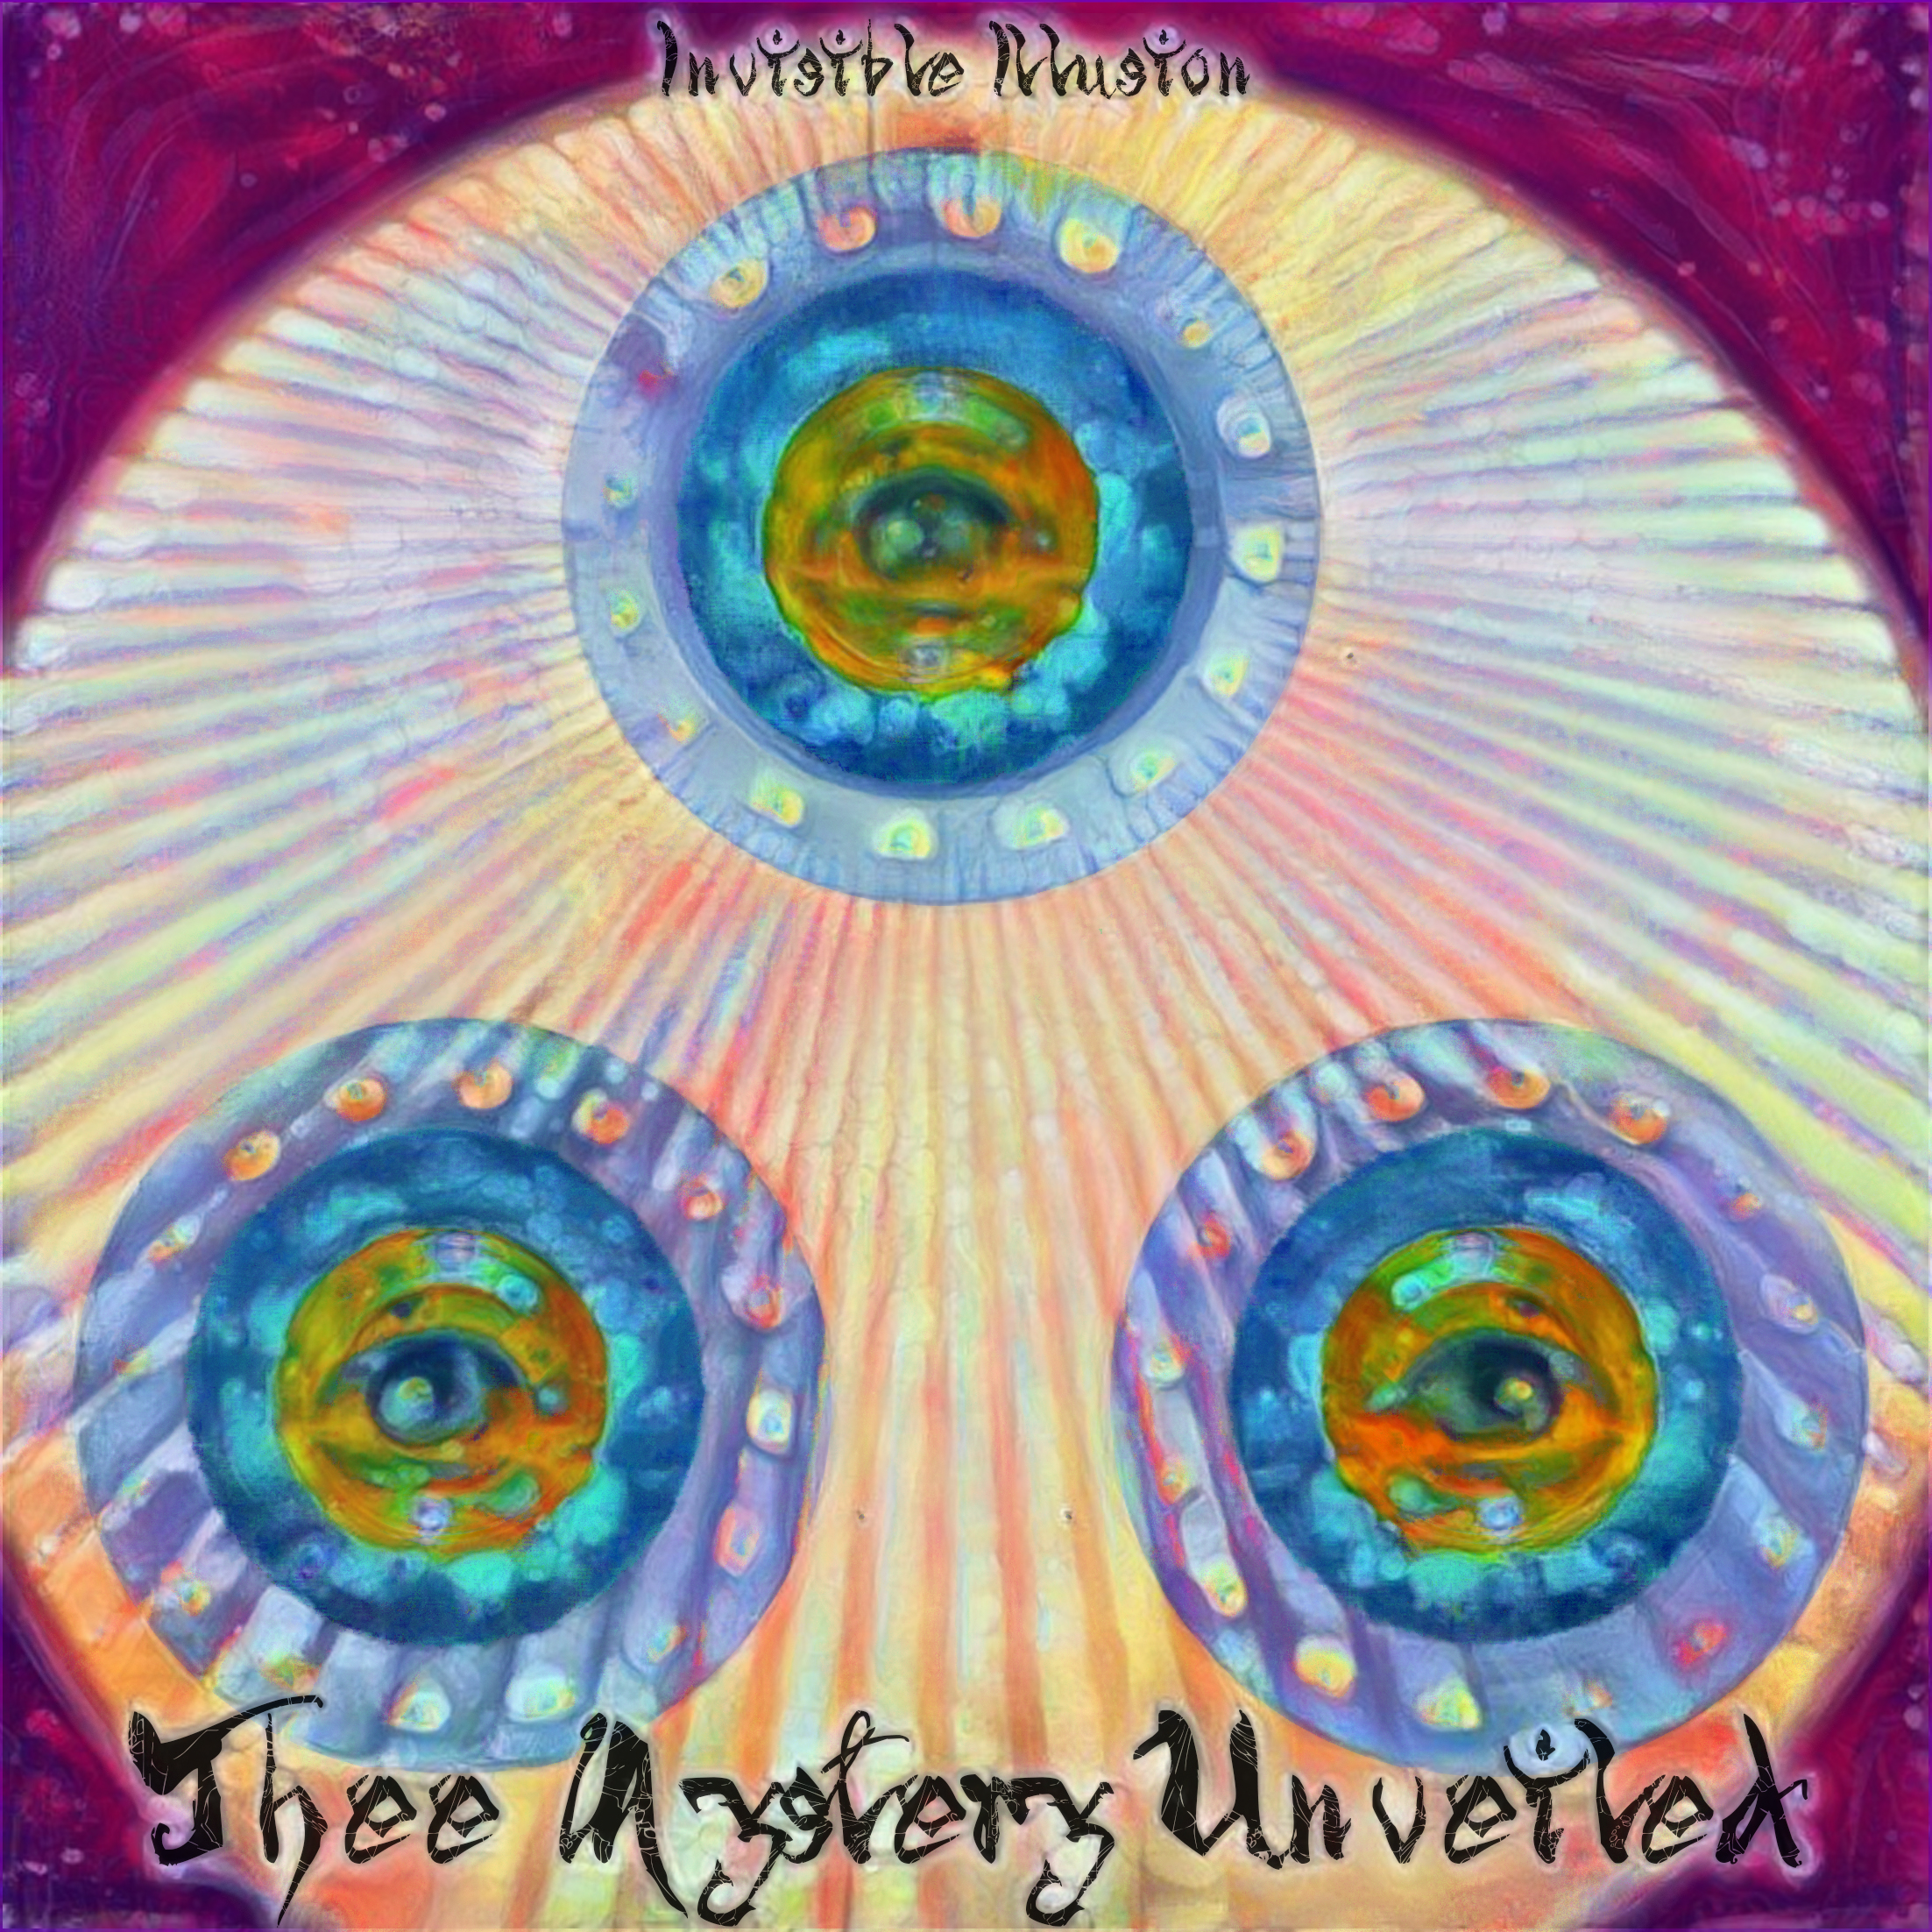 Invisible Illusion – Thee Mystery Unveiled